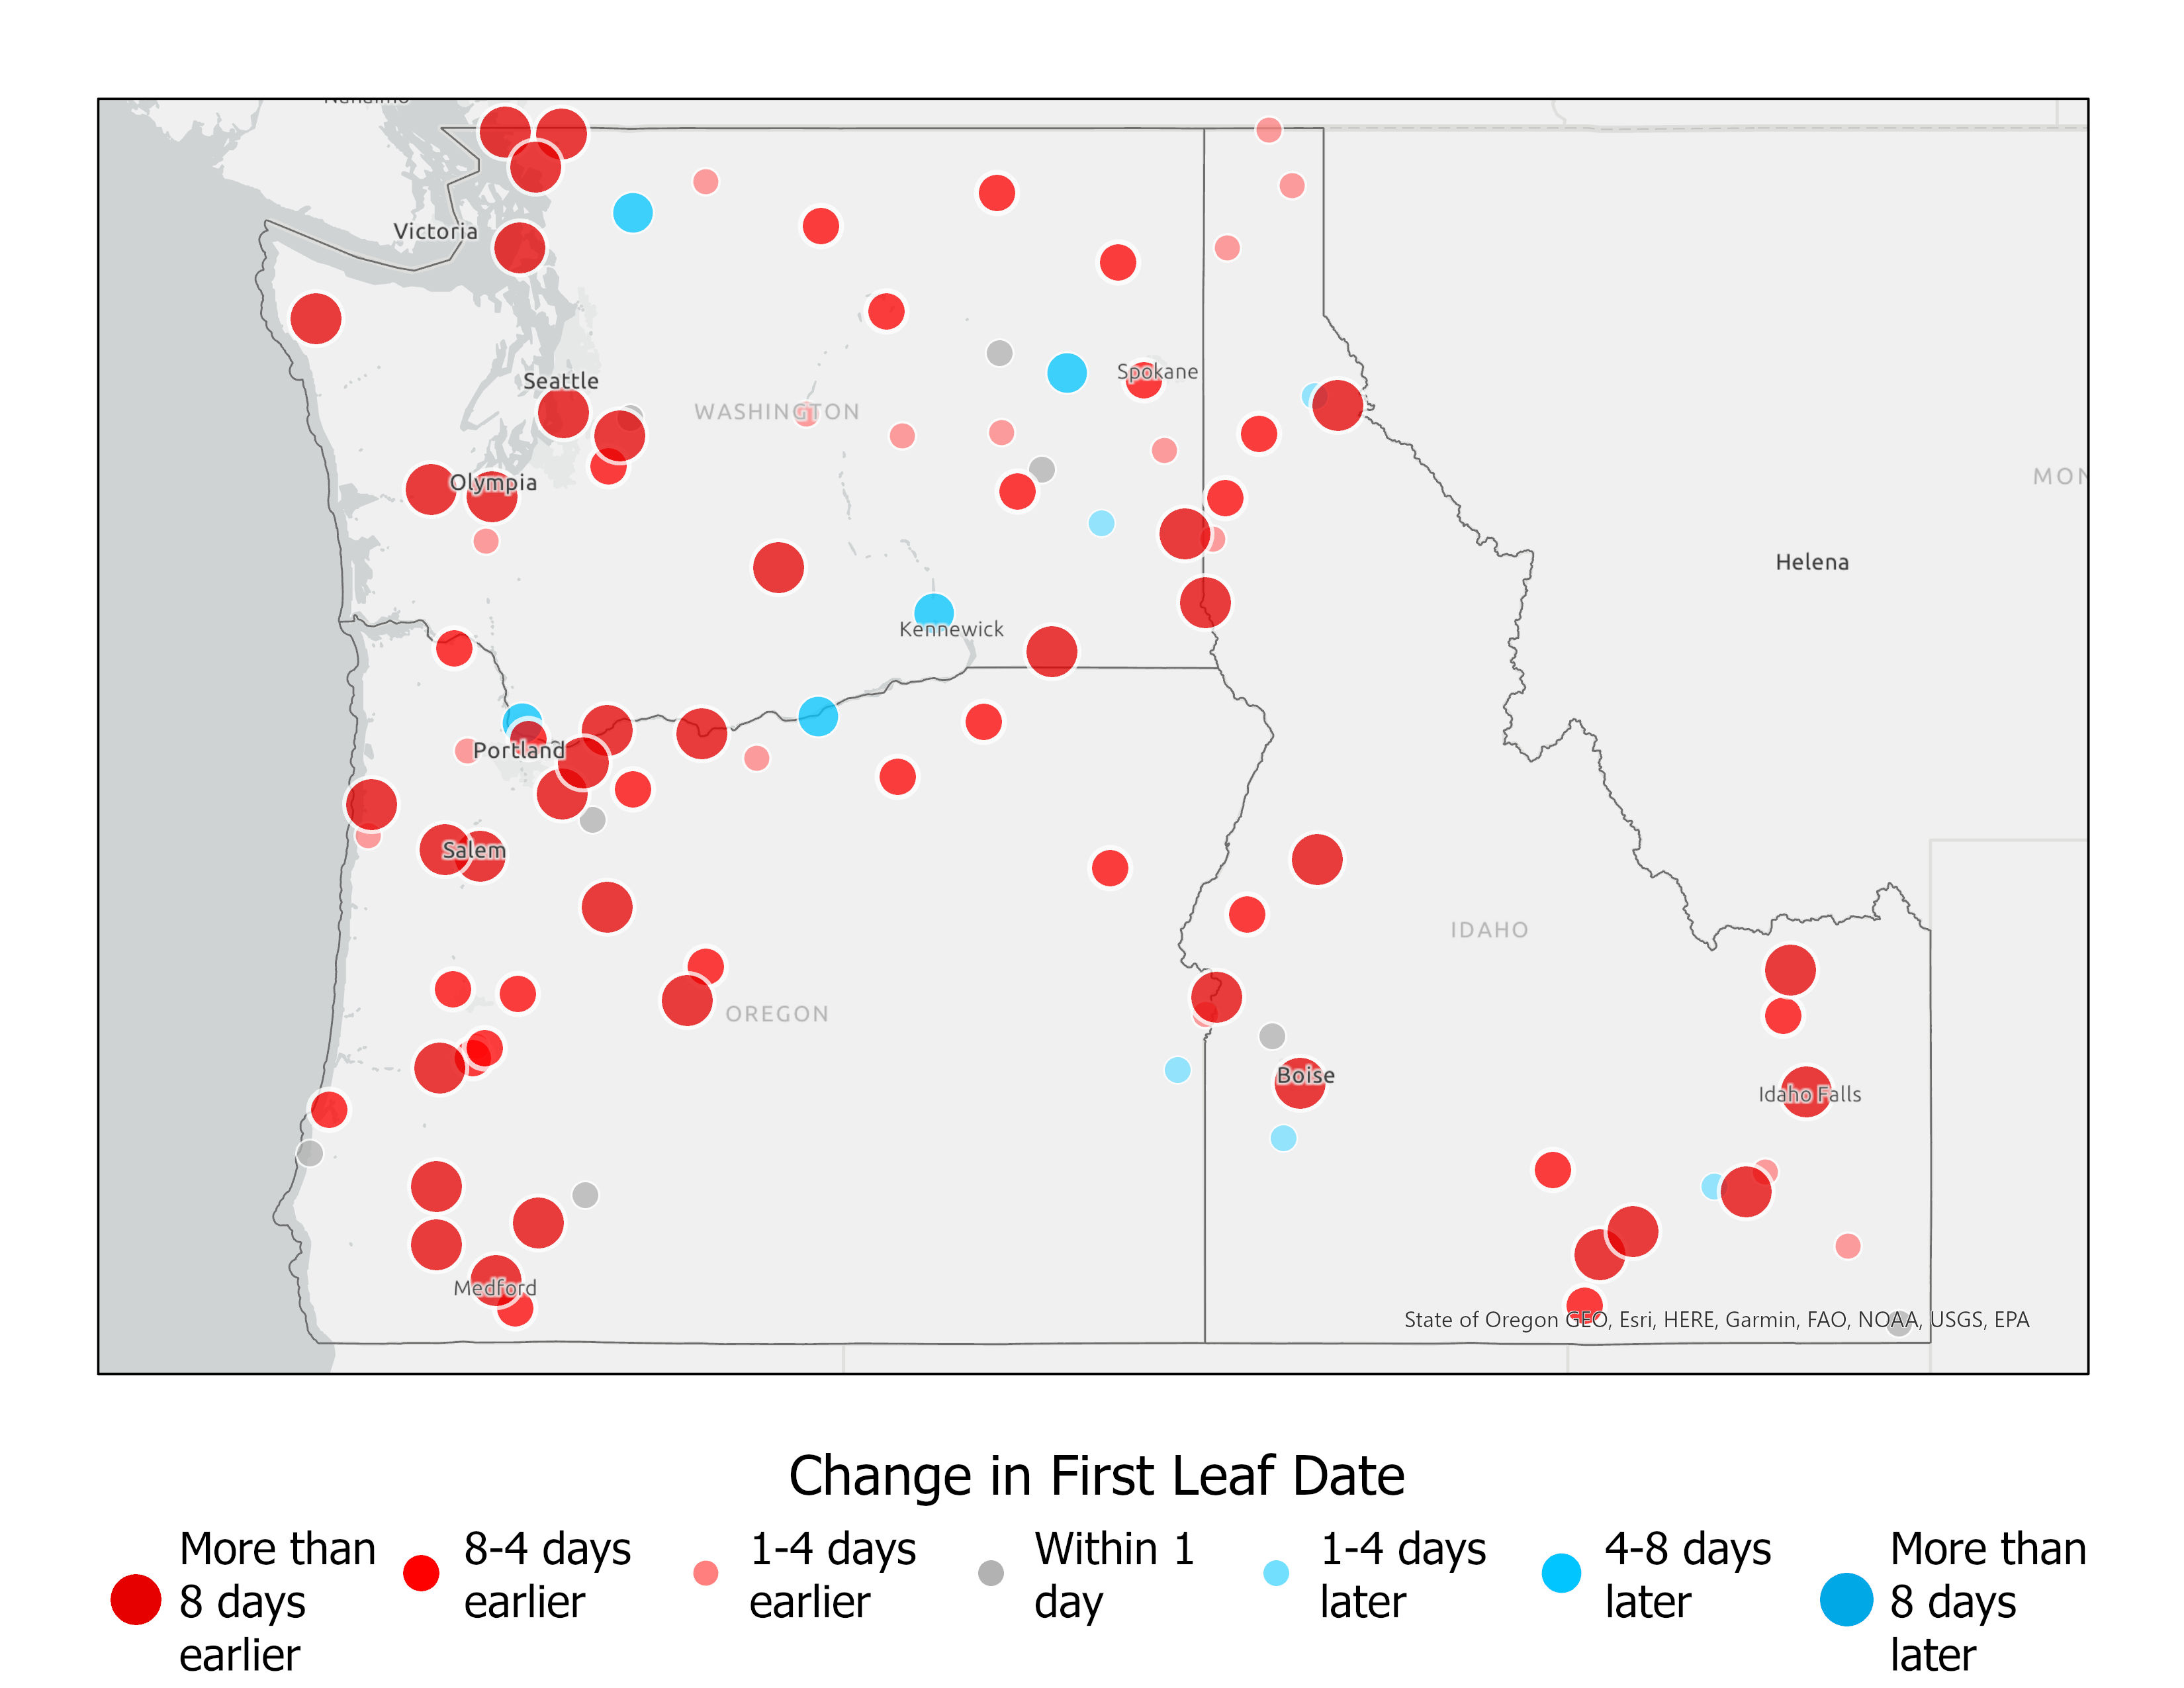 map of first leaf date in the northwest